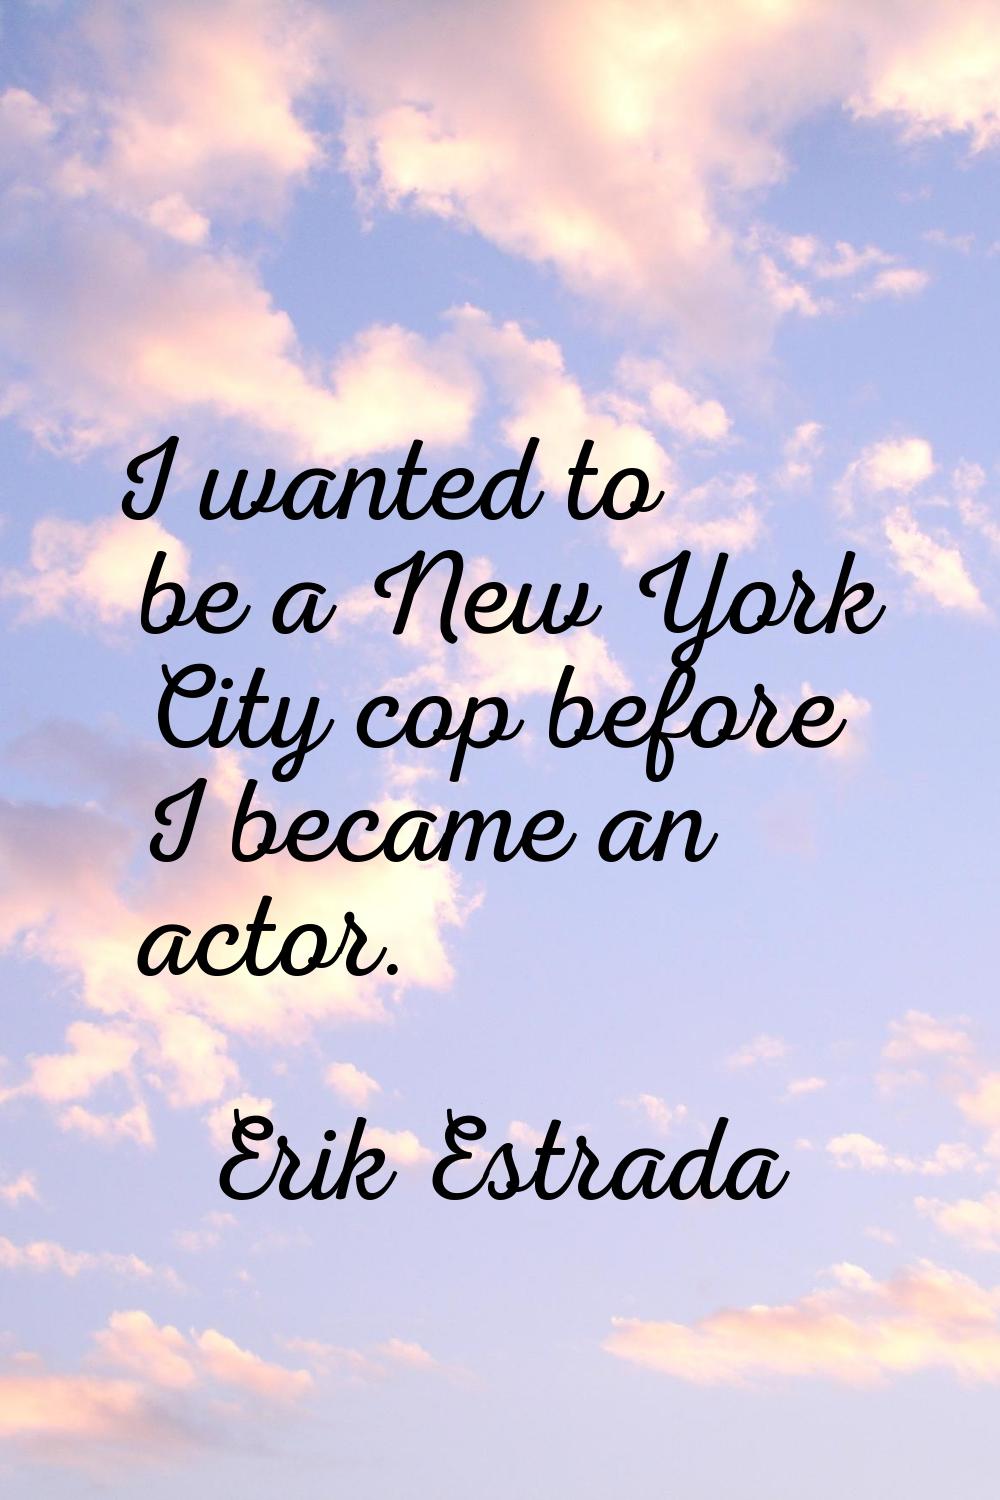 I wanted to be a New York City cop before I became an actor.